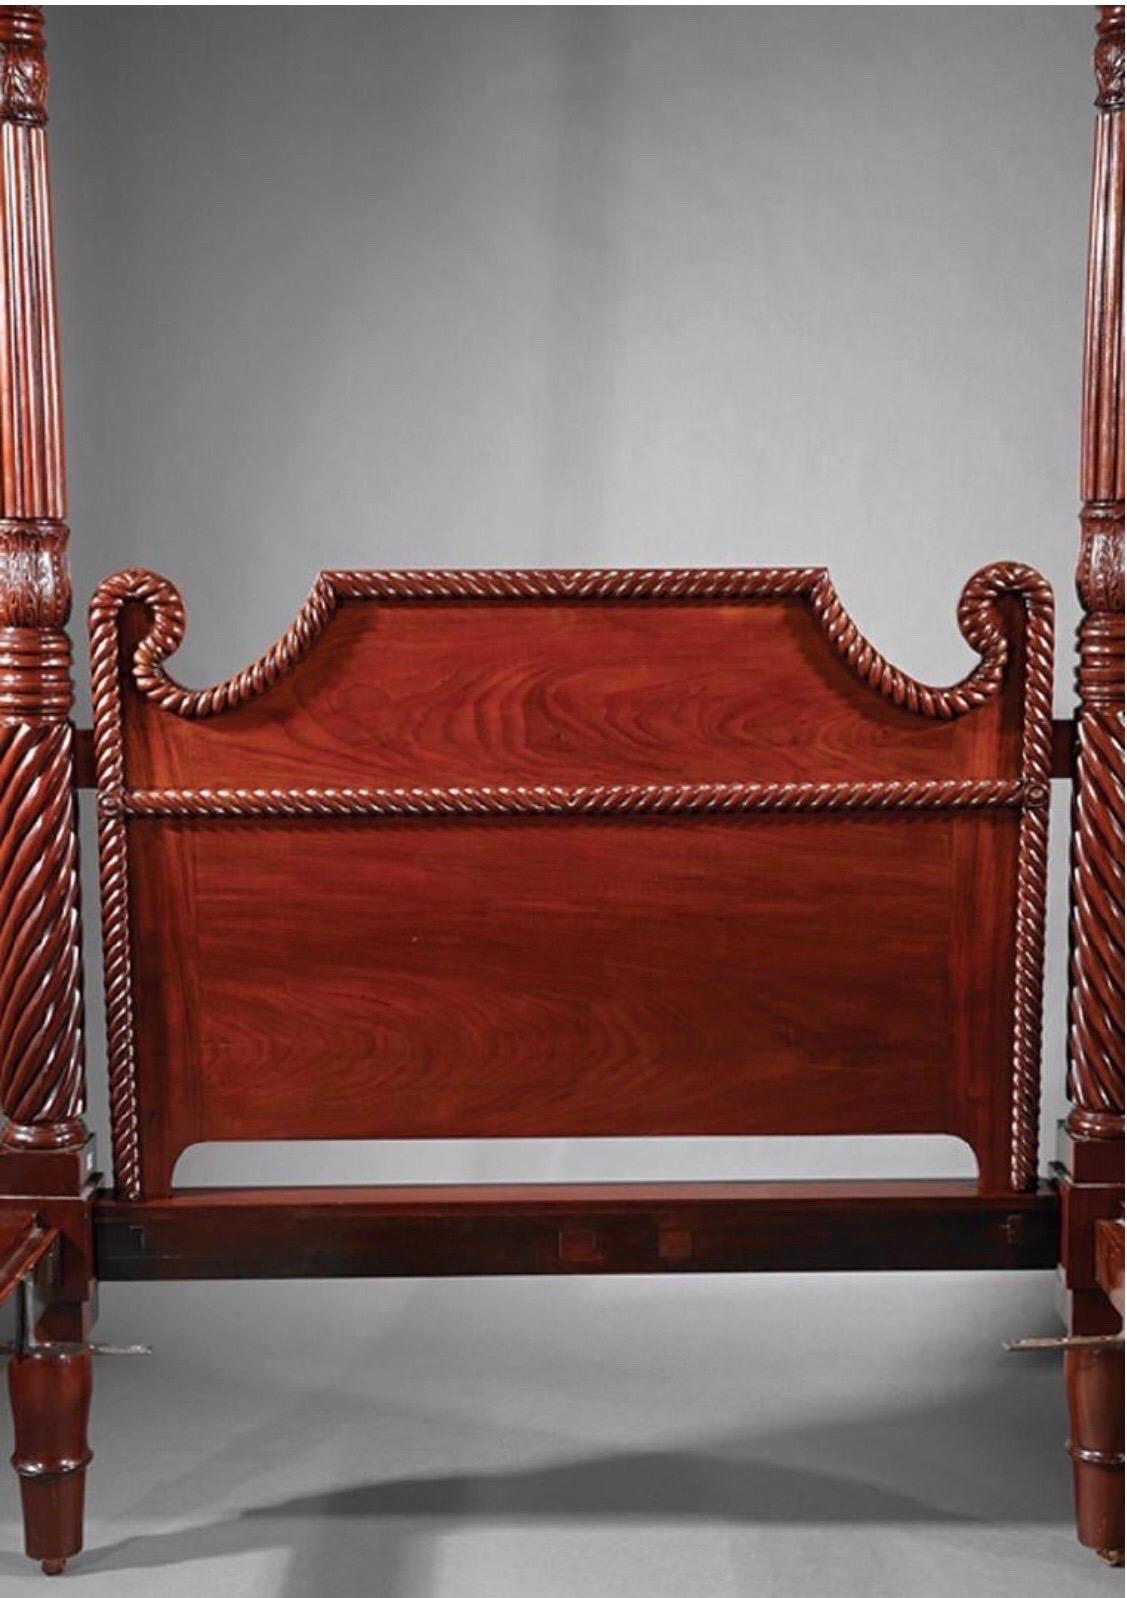 Caribbean 19th Century West Indies Mahogany 4 Post Bed